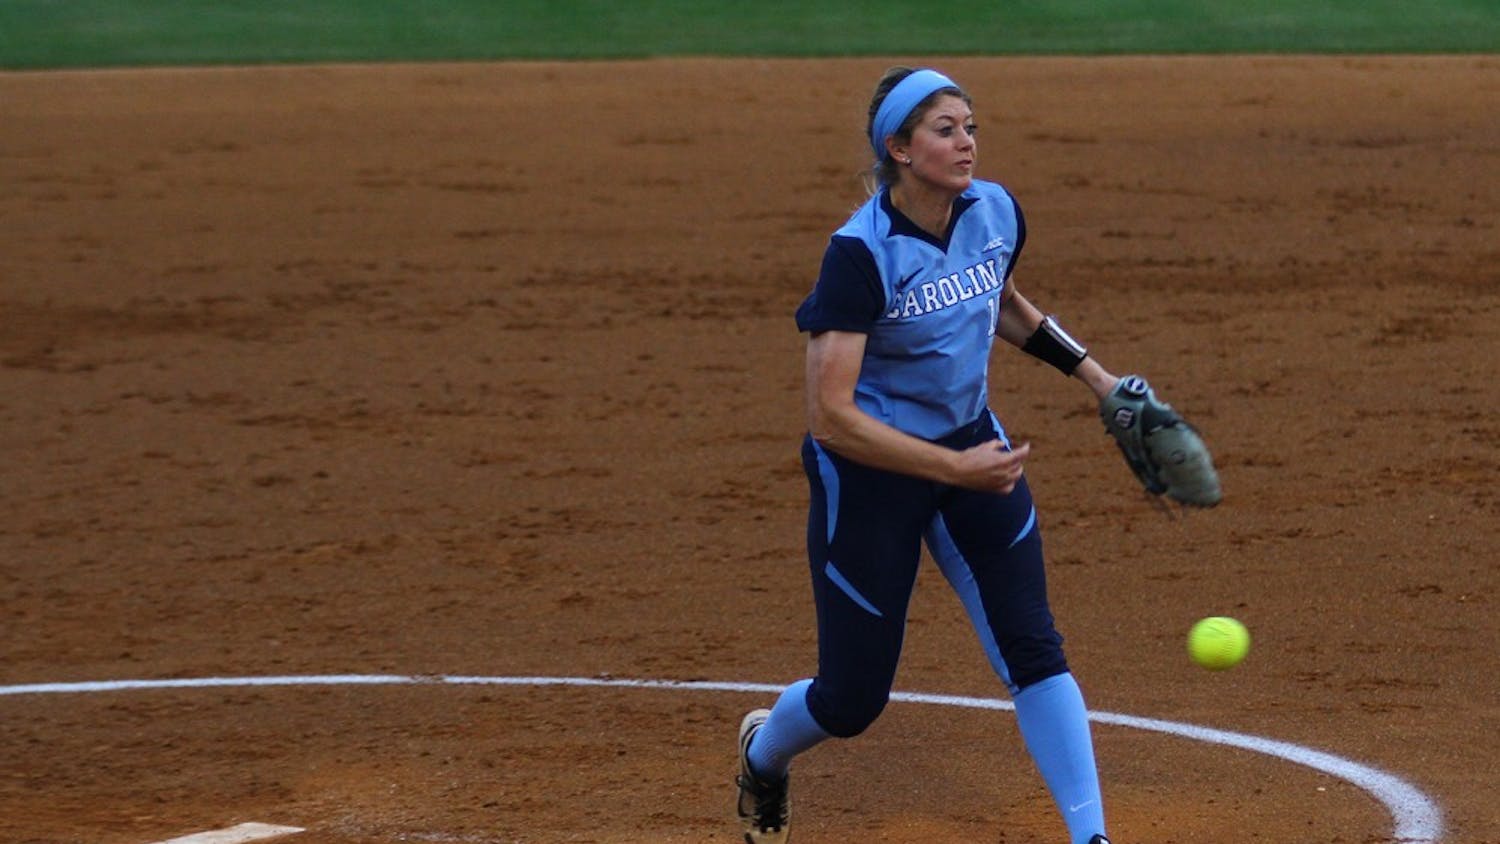 Kendra Lynch throws a pitch during the softball team's victory over Notre Dame on April 25.